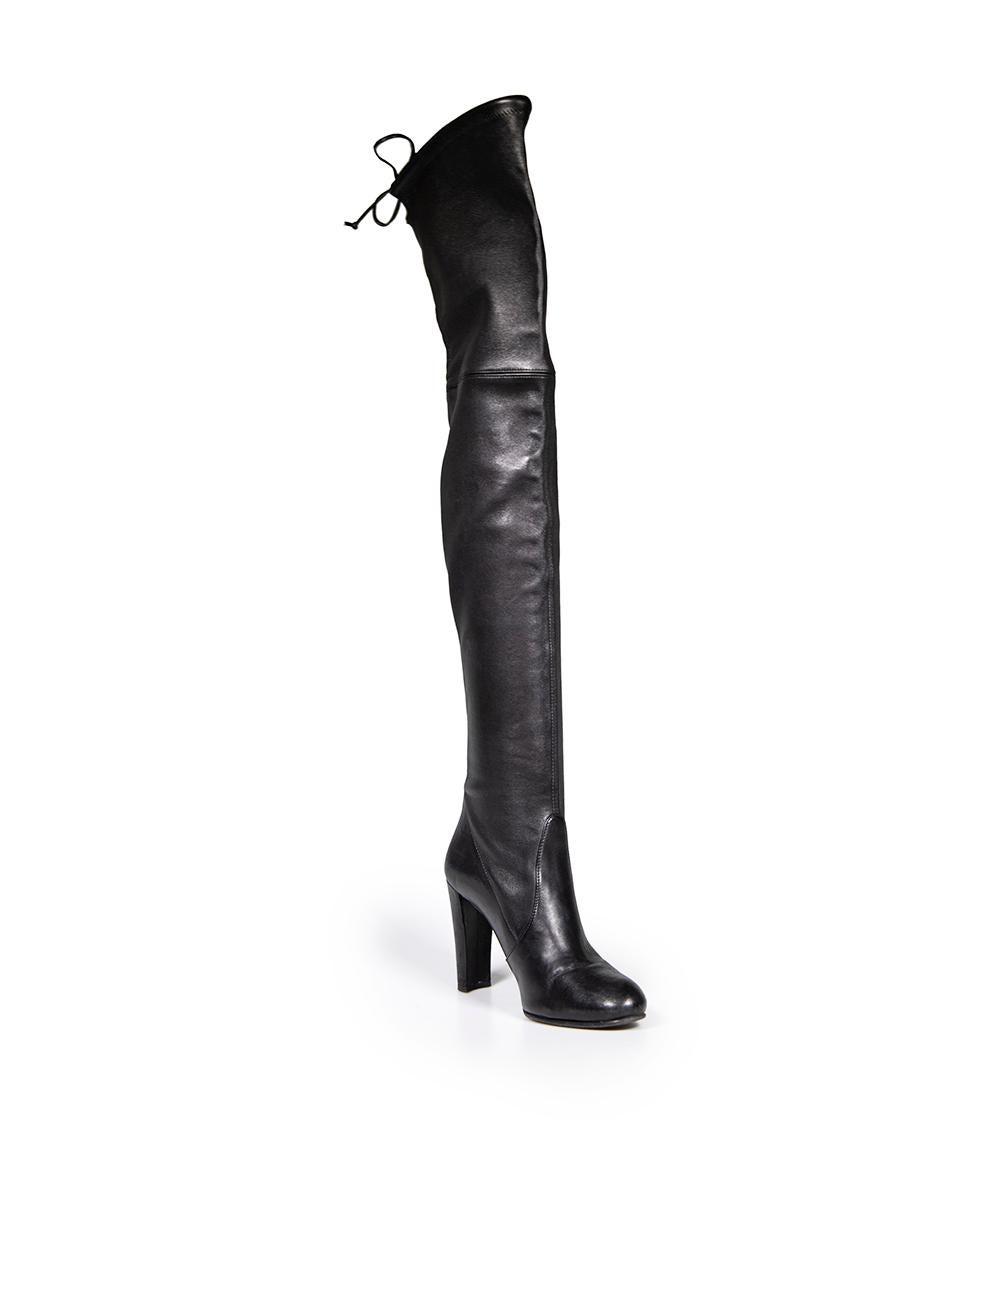 CONDITION is Good. Minor wear to boots is evident. Light wear to both sides, toes and heels of both boots with abrasions to the leather on this used Stuart Weitzman designer resale item.
 
 
 
 Details
 
 
 Black
 
 Leather
 
 Boots
 
 Over the